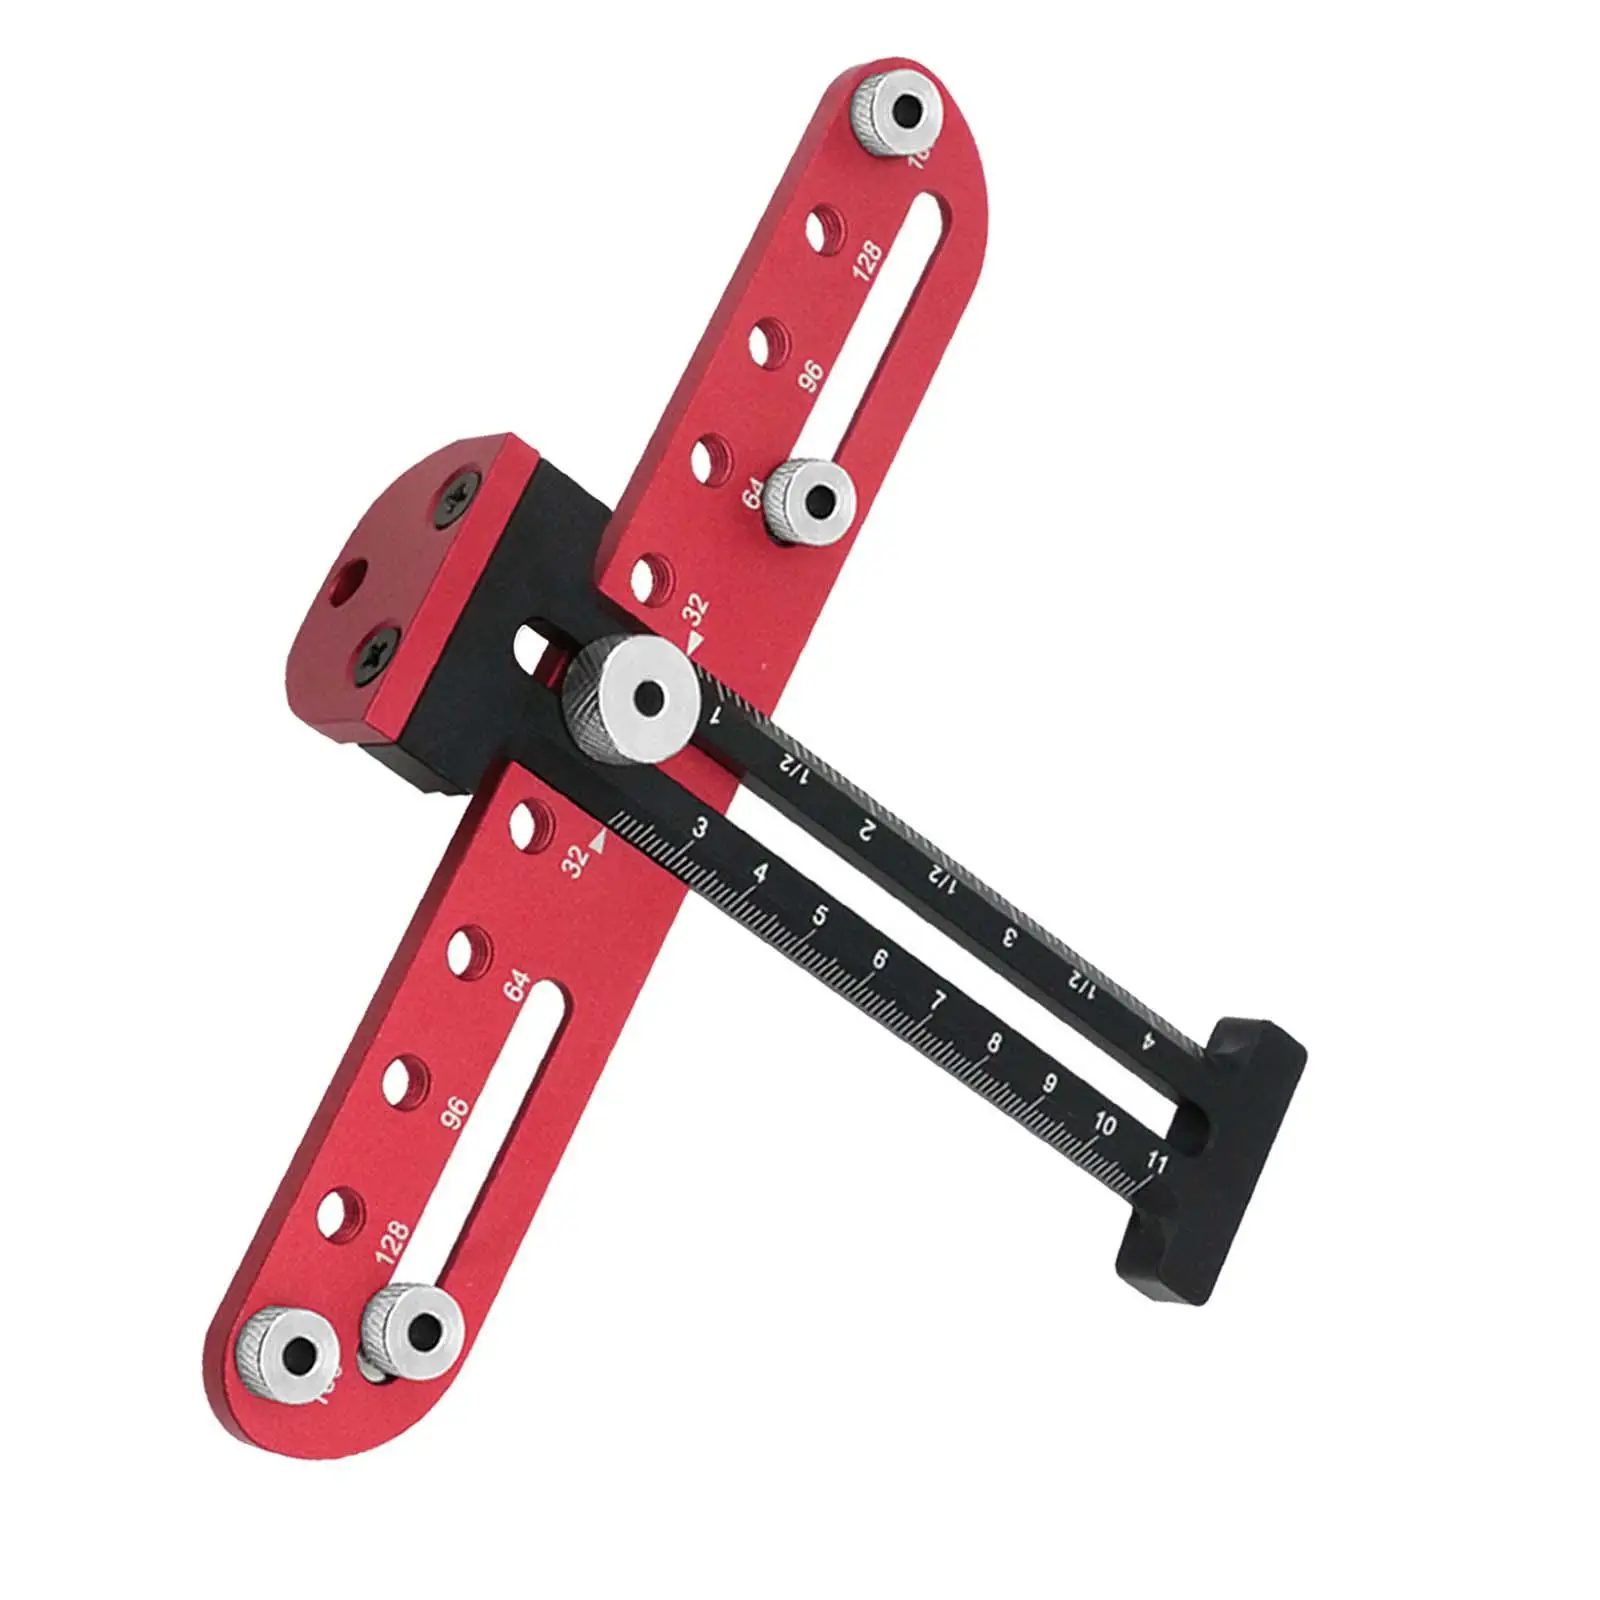 Hole punch Template Wardrobe Adjustable Drill Guide Ruler Measure Tool Drill Hole Punch Jig